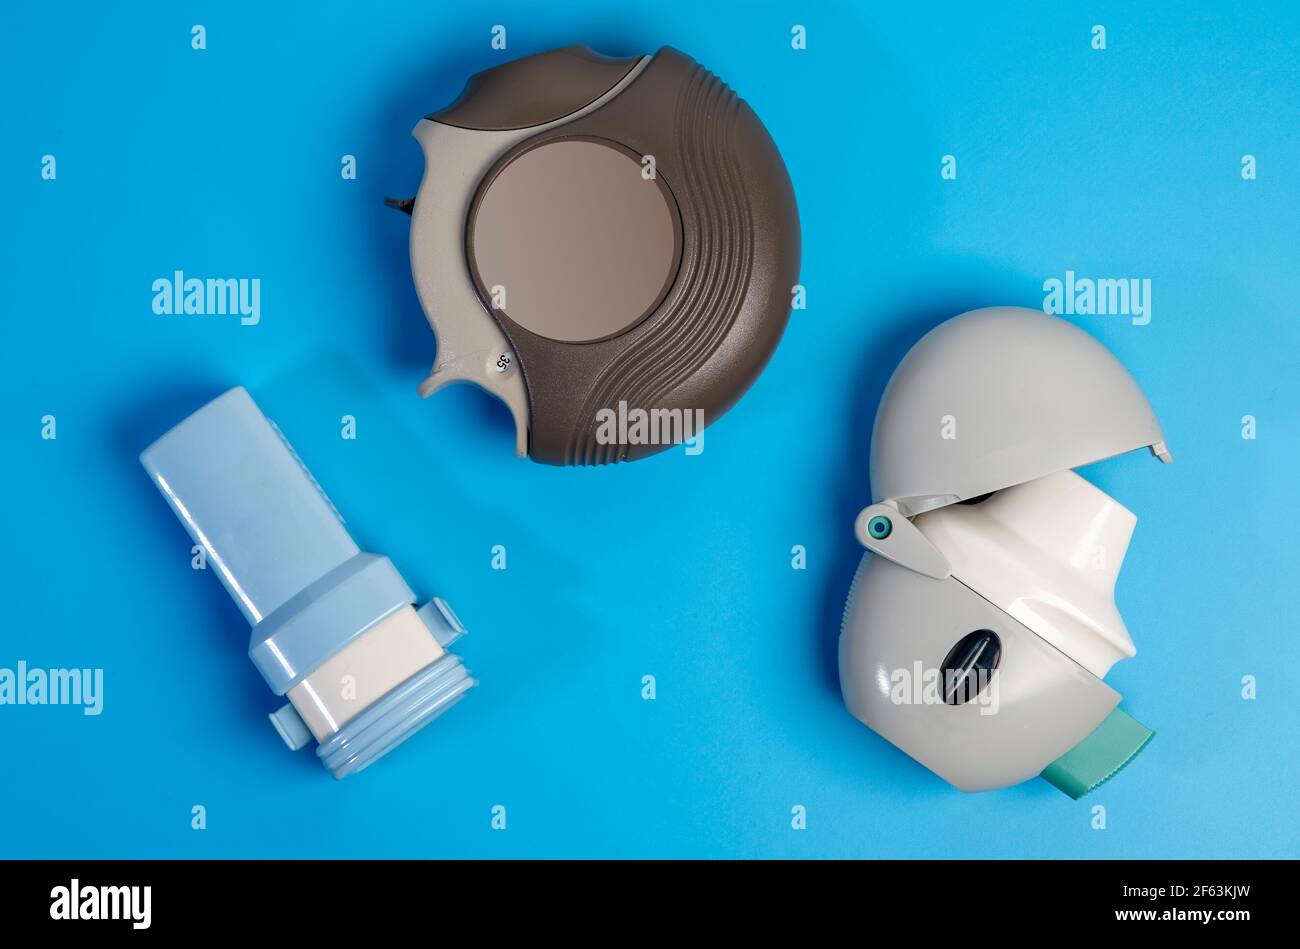 Different types of COPD or Asthma medication instruments ,discus and handihaler and a capsule inhaler.On blue background. Stock Photo